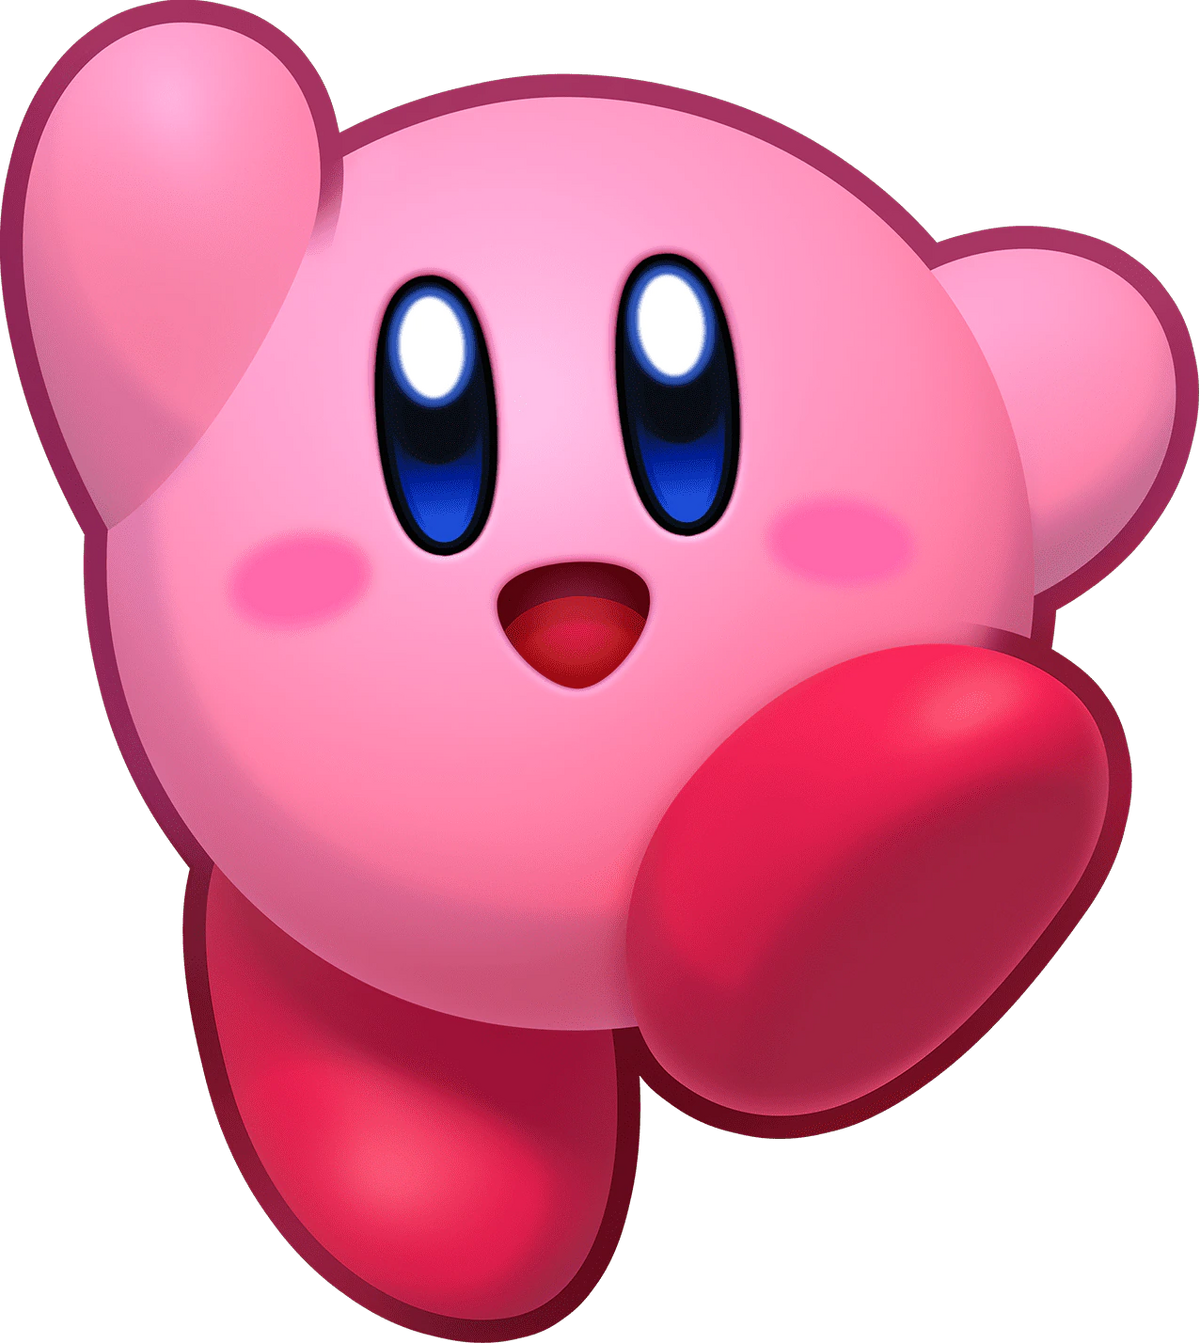 Kirby: How the pink Nintendo character became gaming's surprise hero